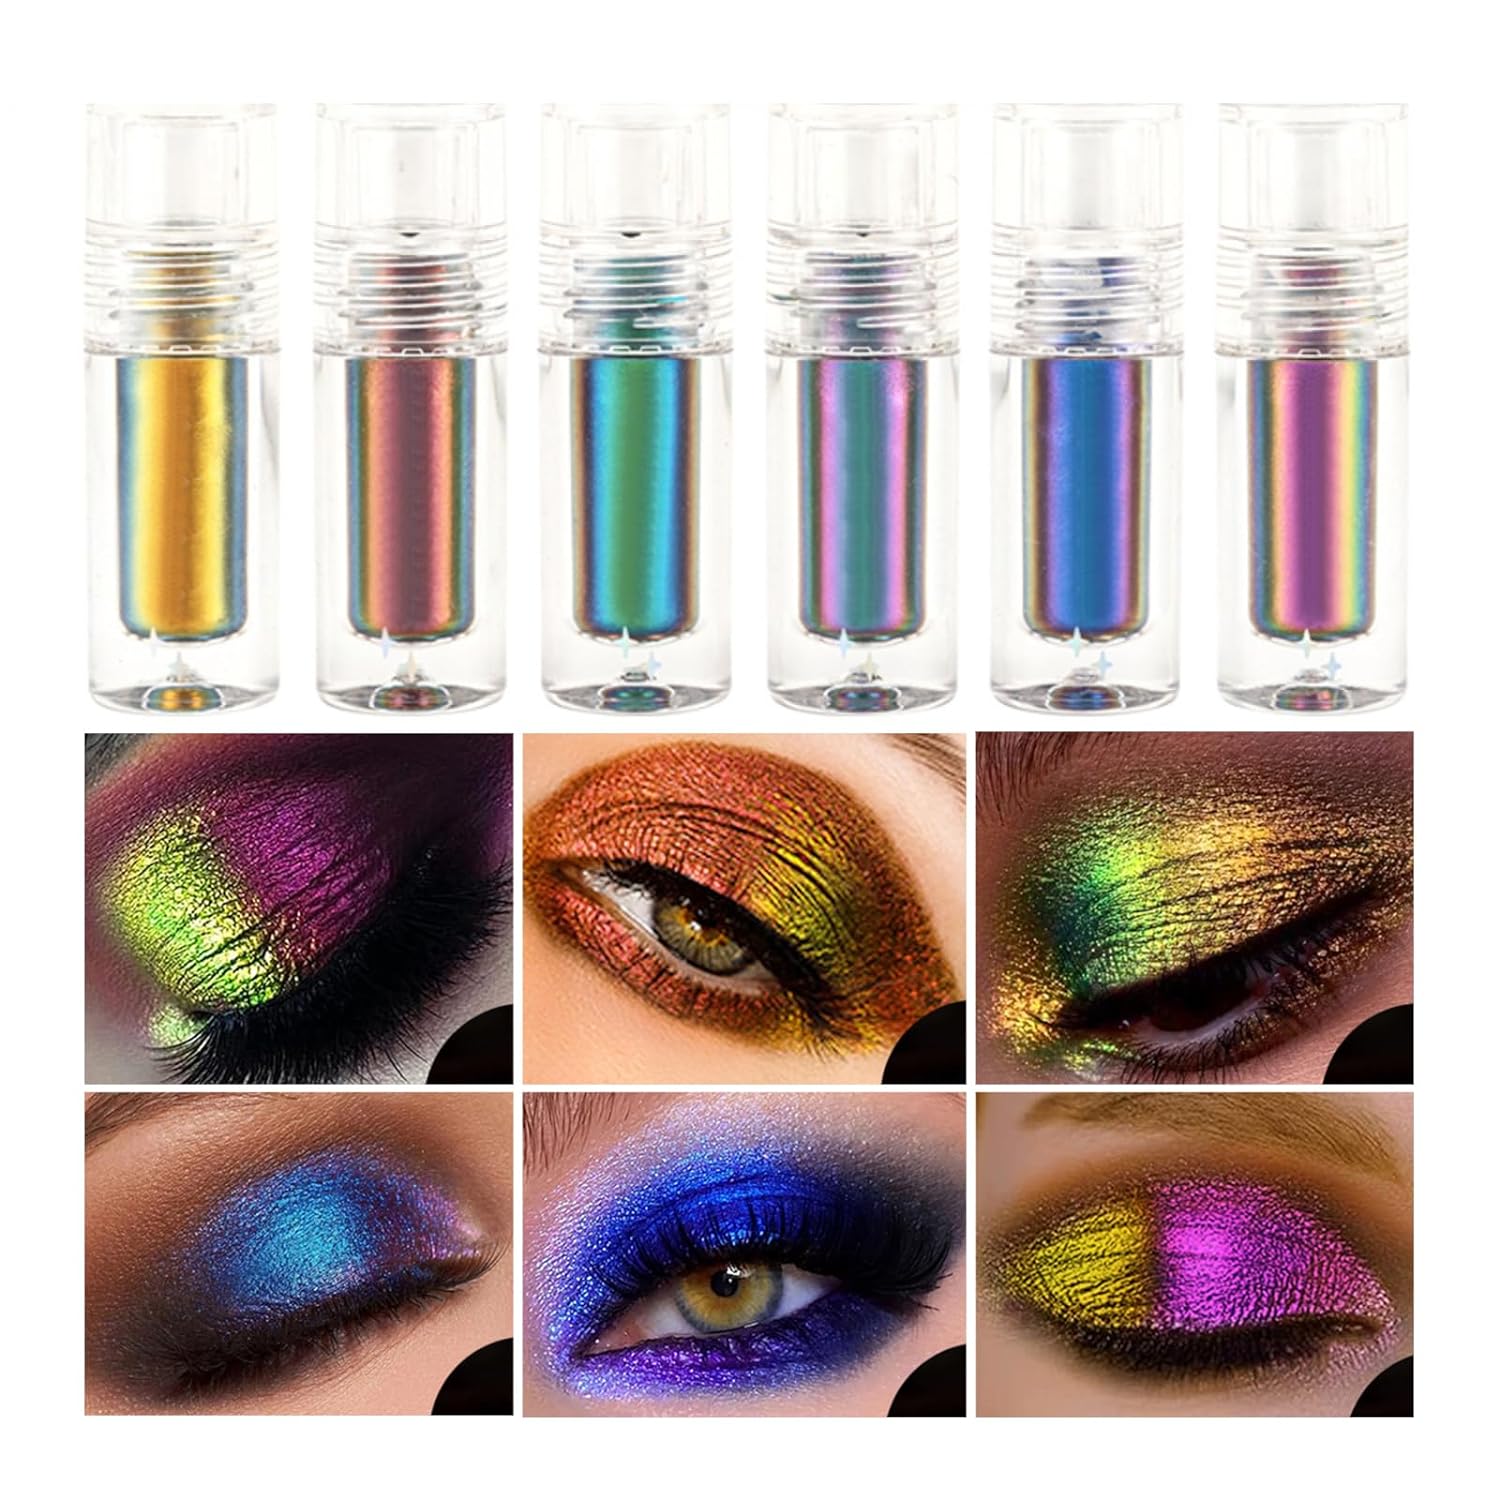 Hotiary Chameleon Eyeshadow Stick Metallic High Pigments Makeup Metals Gloss Shimmer Shining Eye Shadow for Eyes Sparkling Pen Kit Gift for Lady (6 Colors Chameleon Eyeshadow)